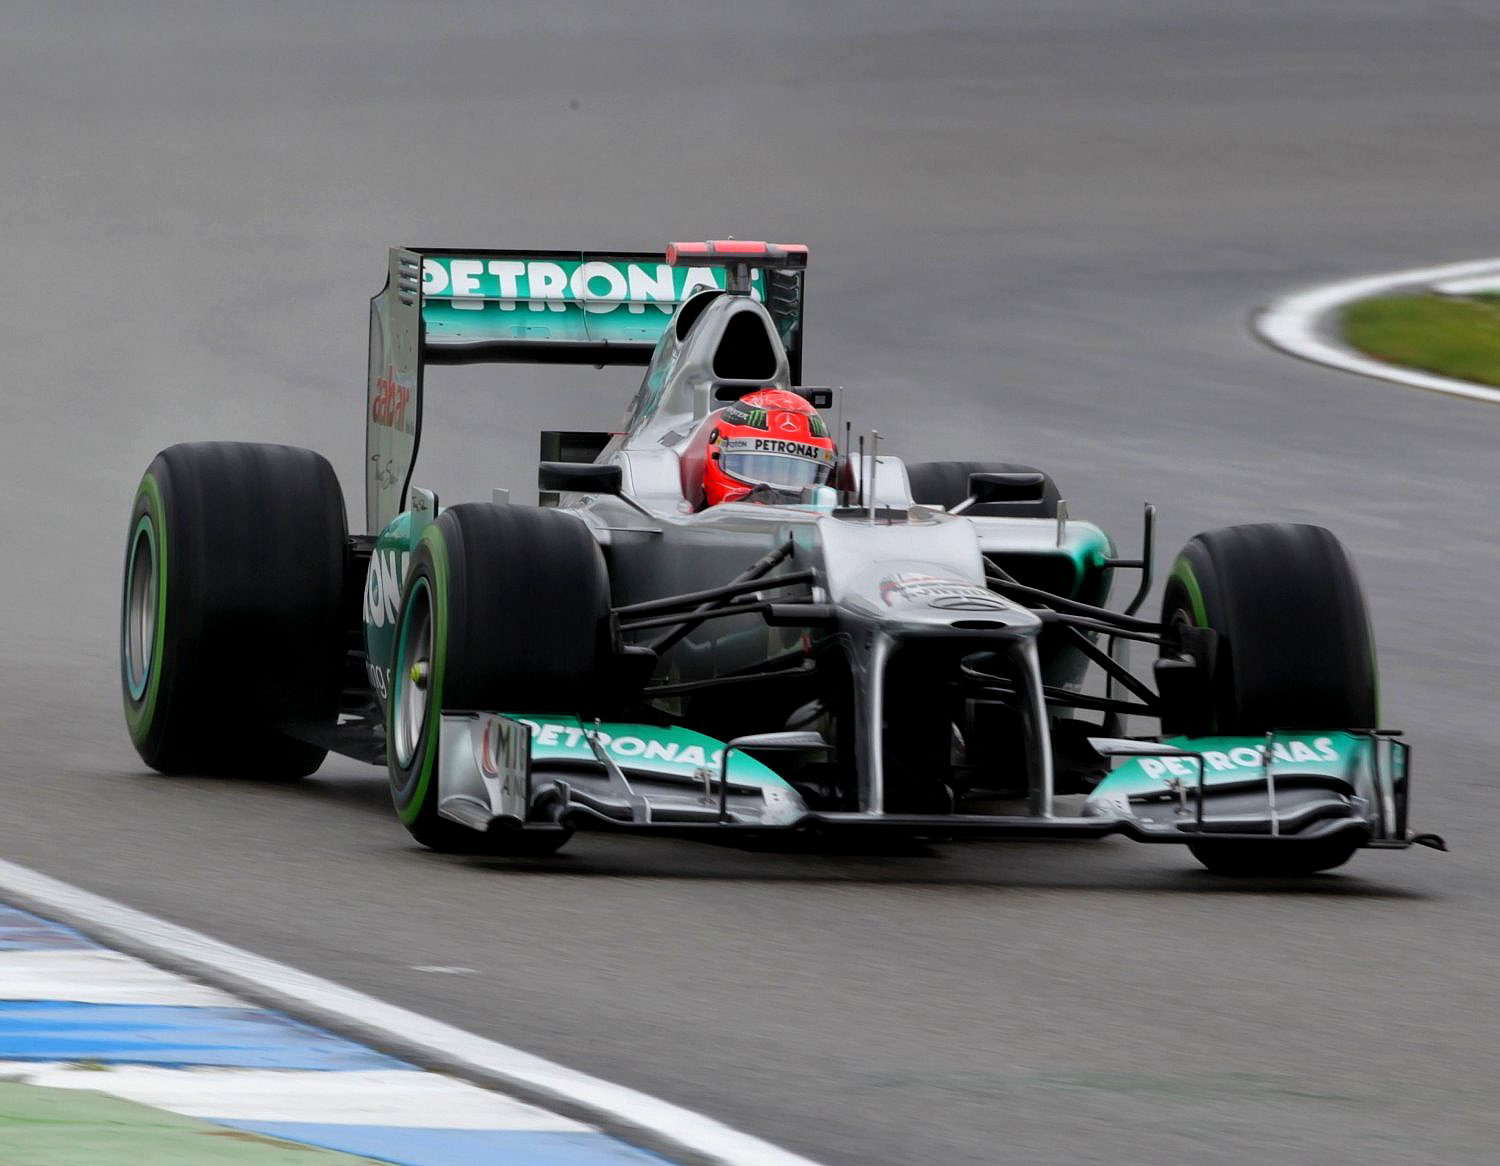 Mercedes pushed father Michael Schumacher out of the team after the 2012 season and son Mick didn't forget the shaft his father received from Mercedes